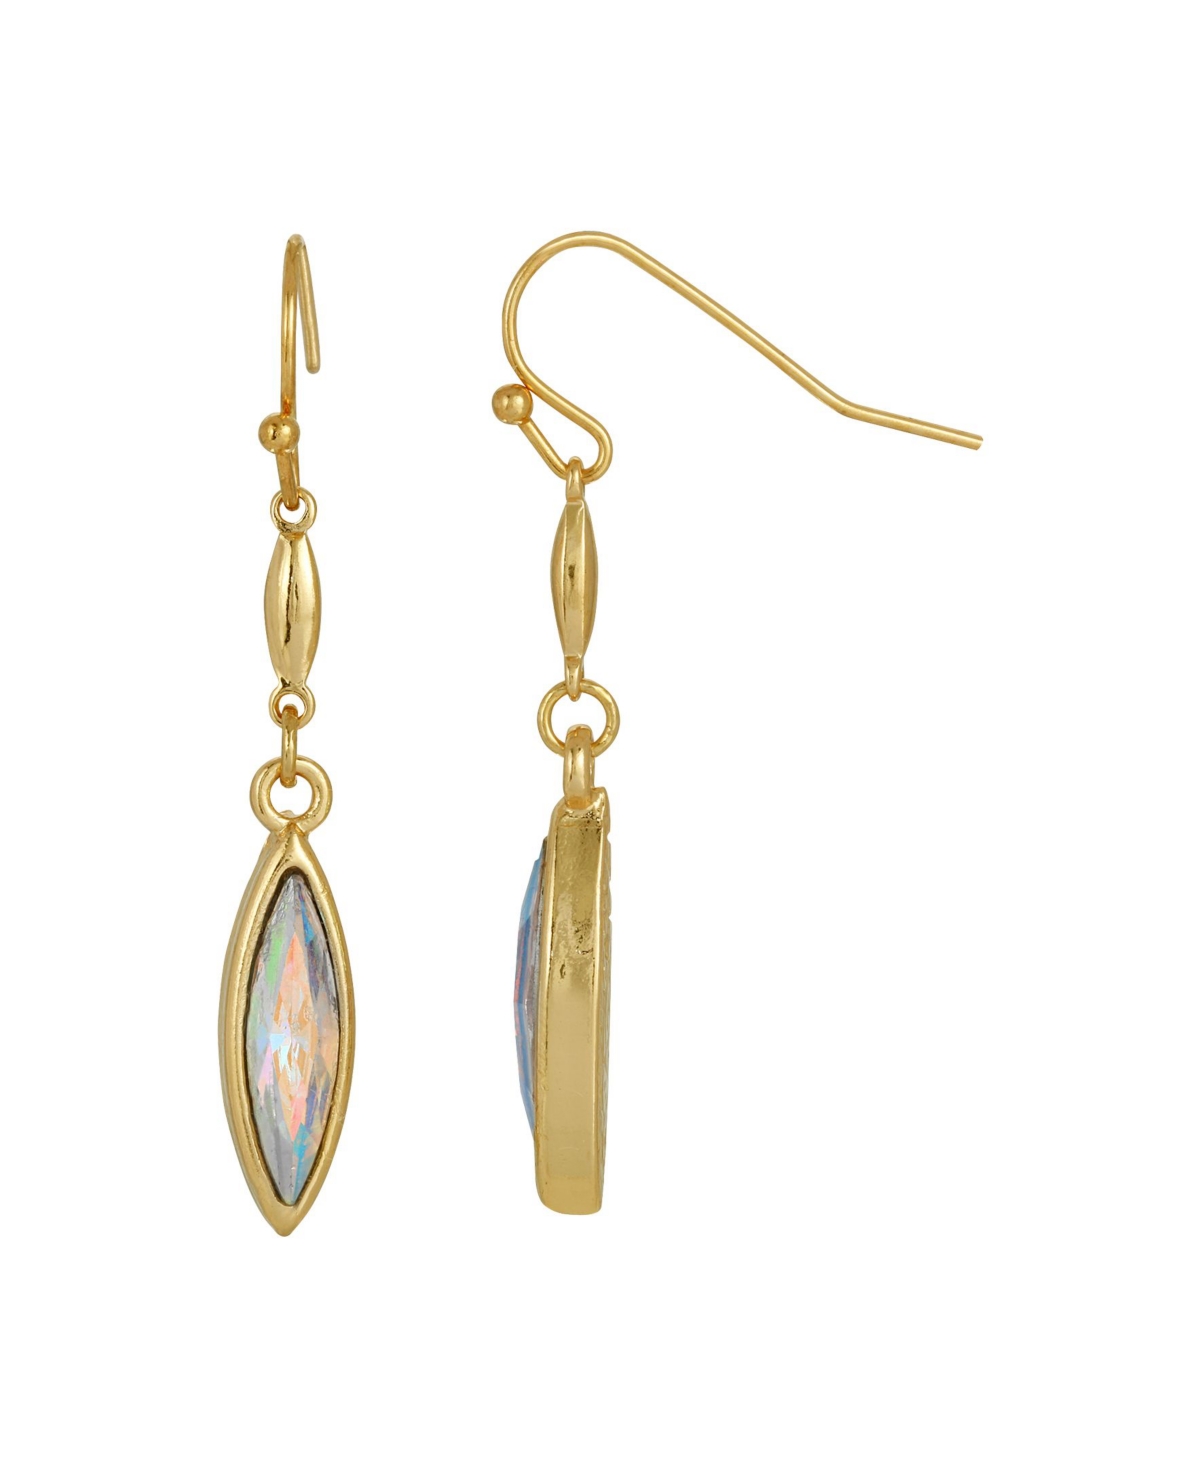 2028 Gold-tone Crystal Drop Earrings In Aurore Boreale